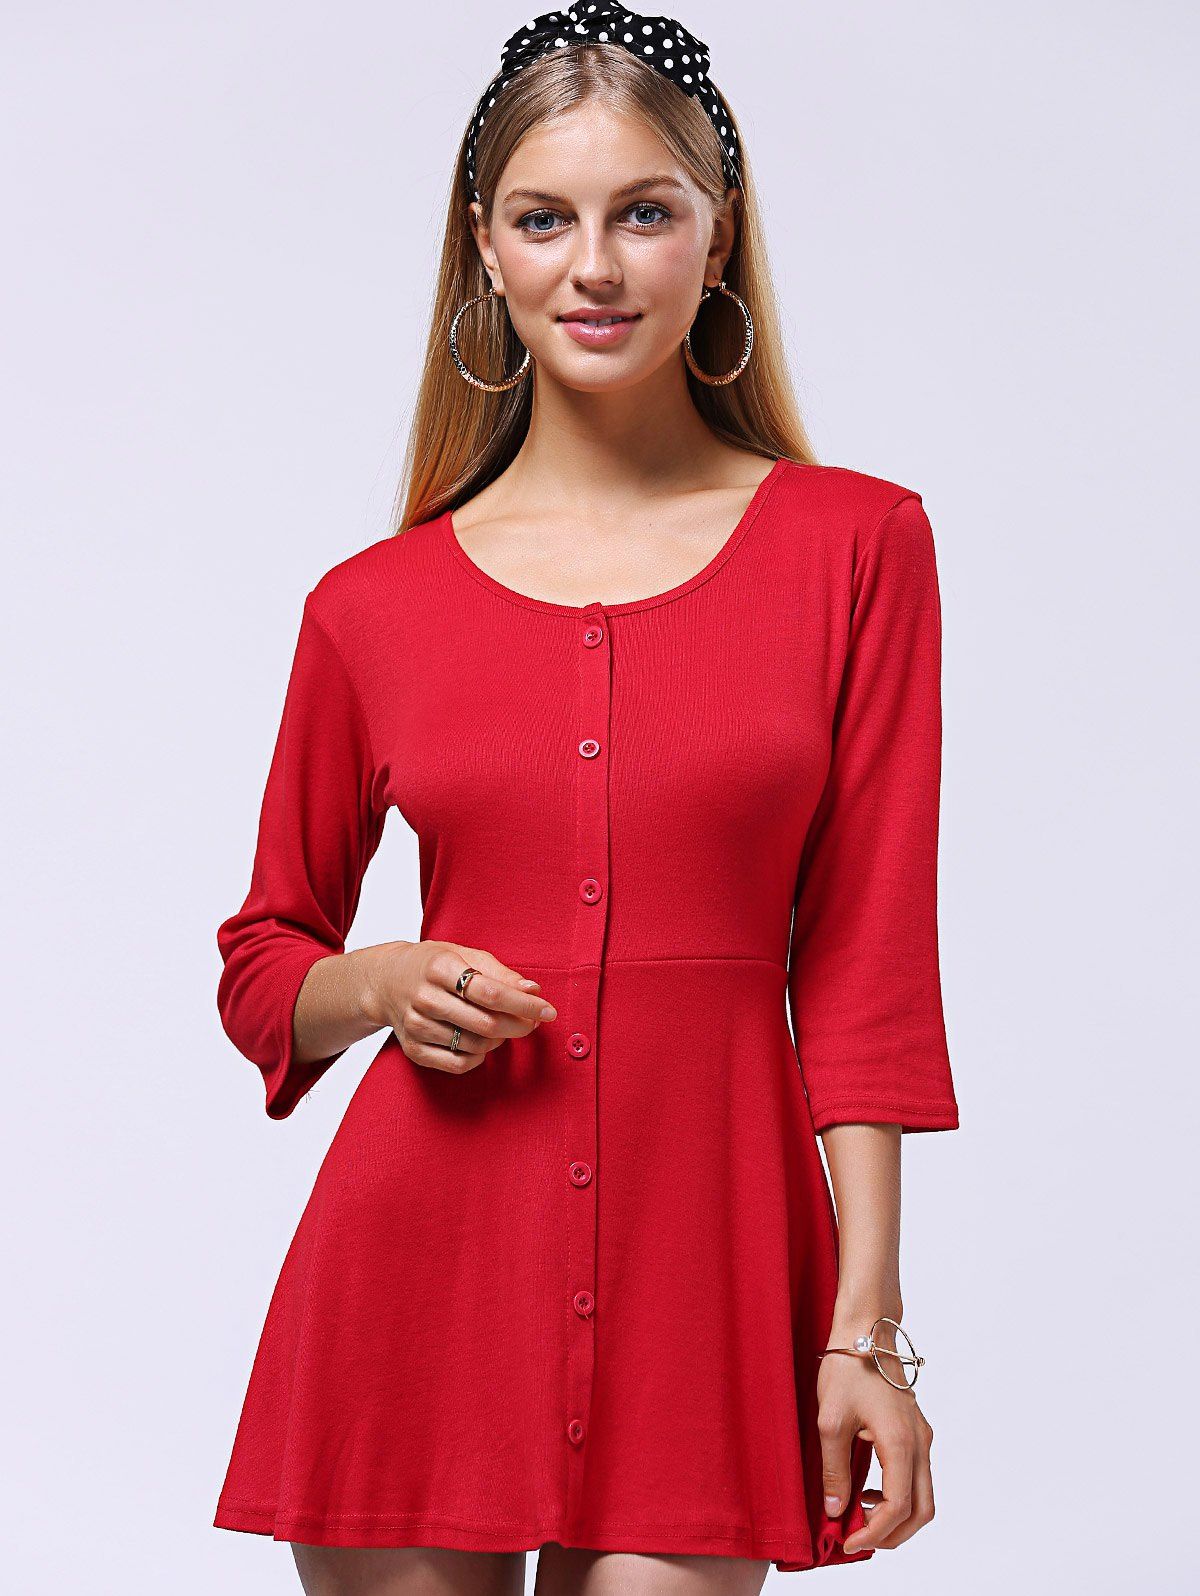 long sleeve red button up dress